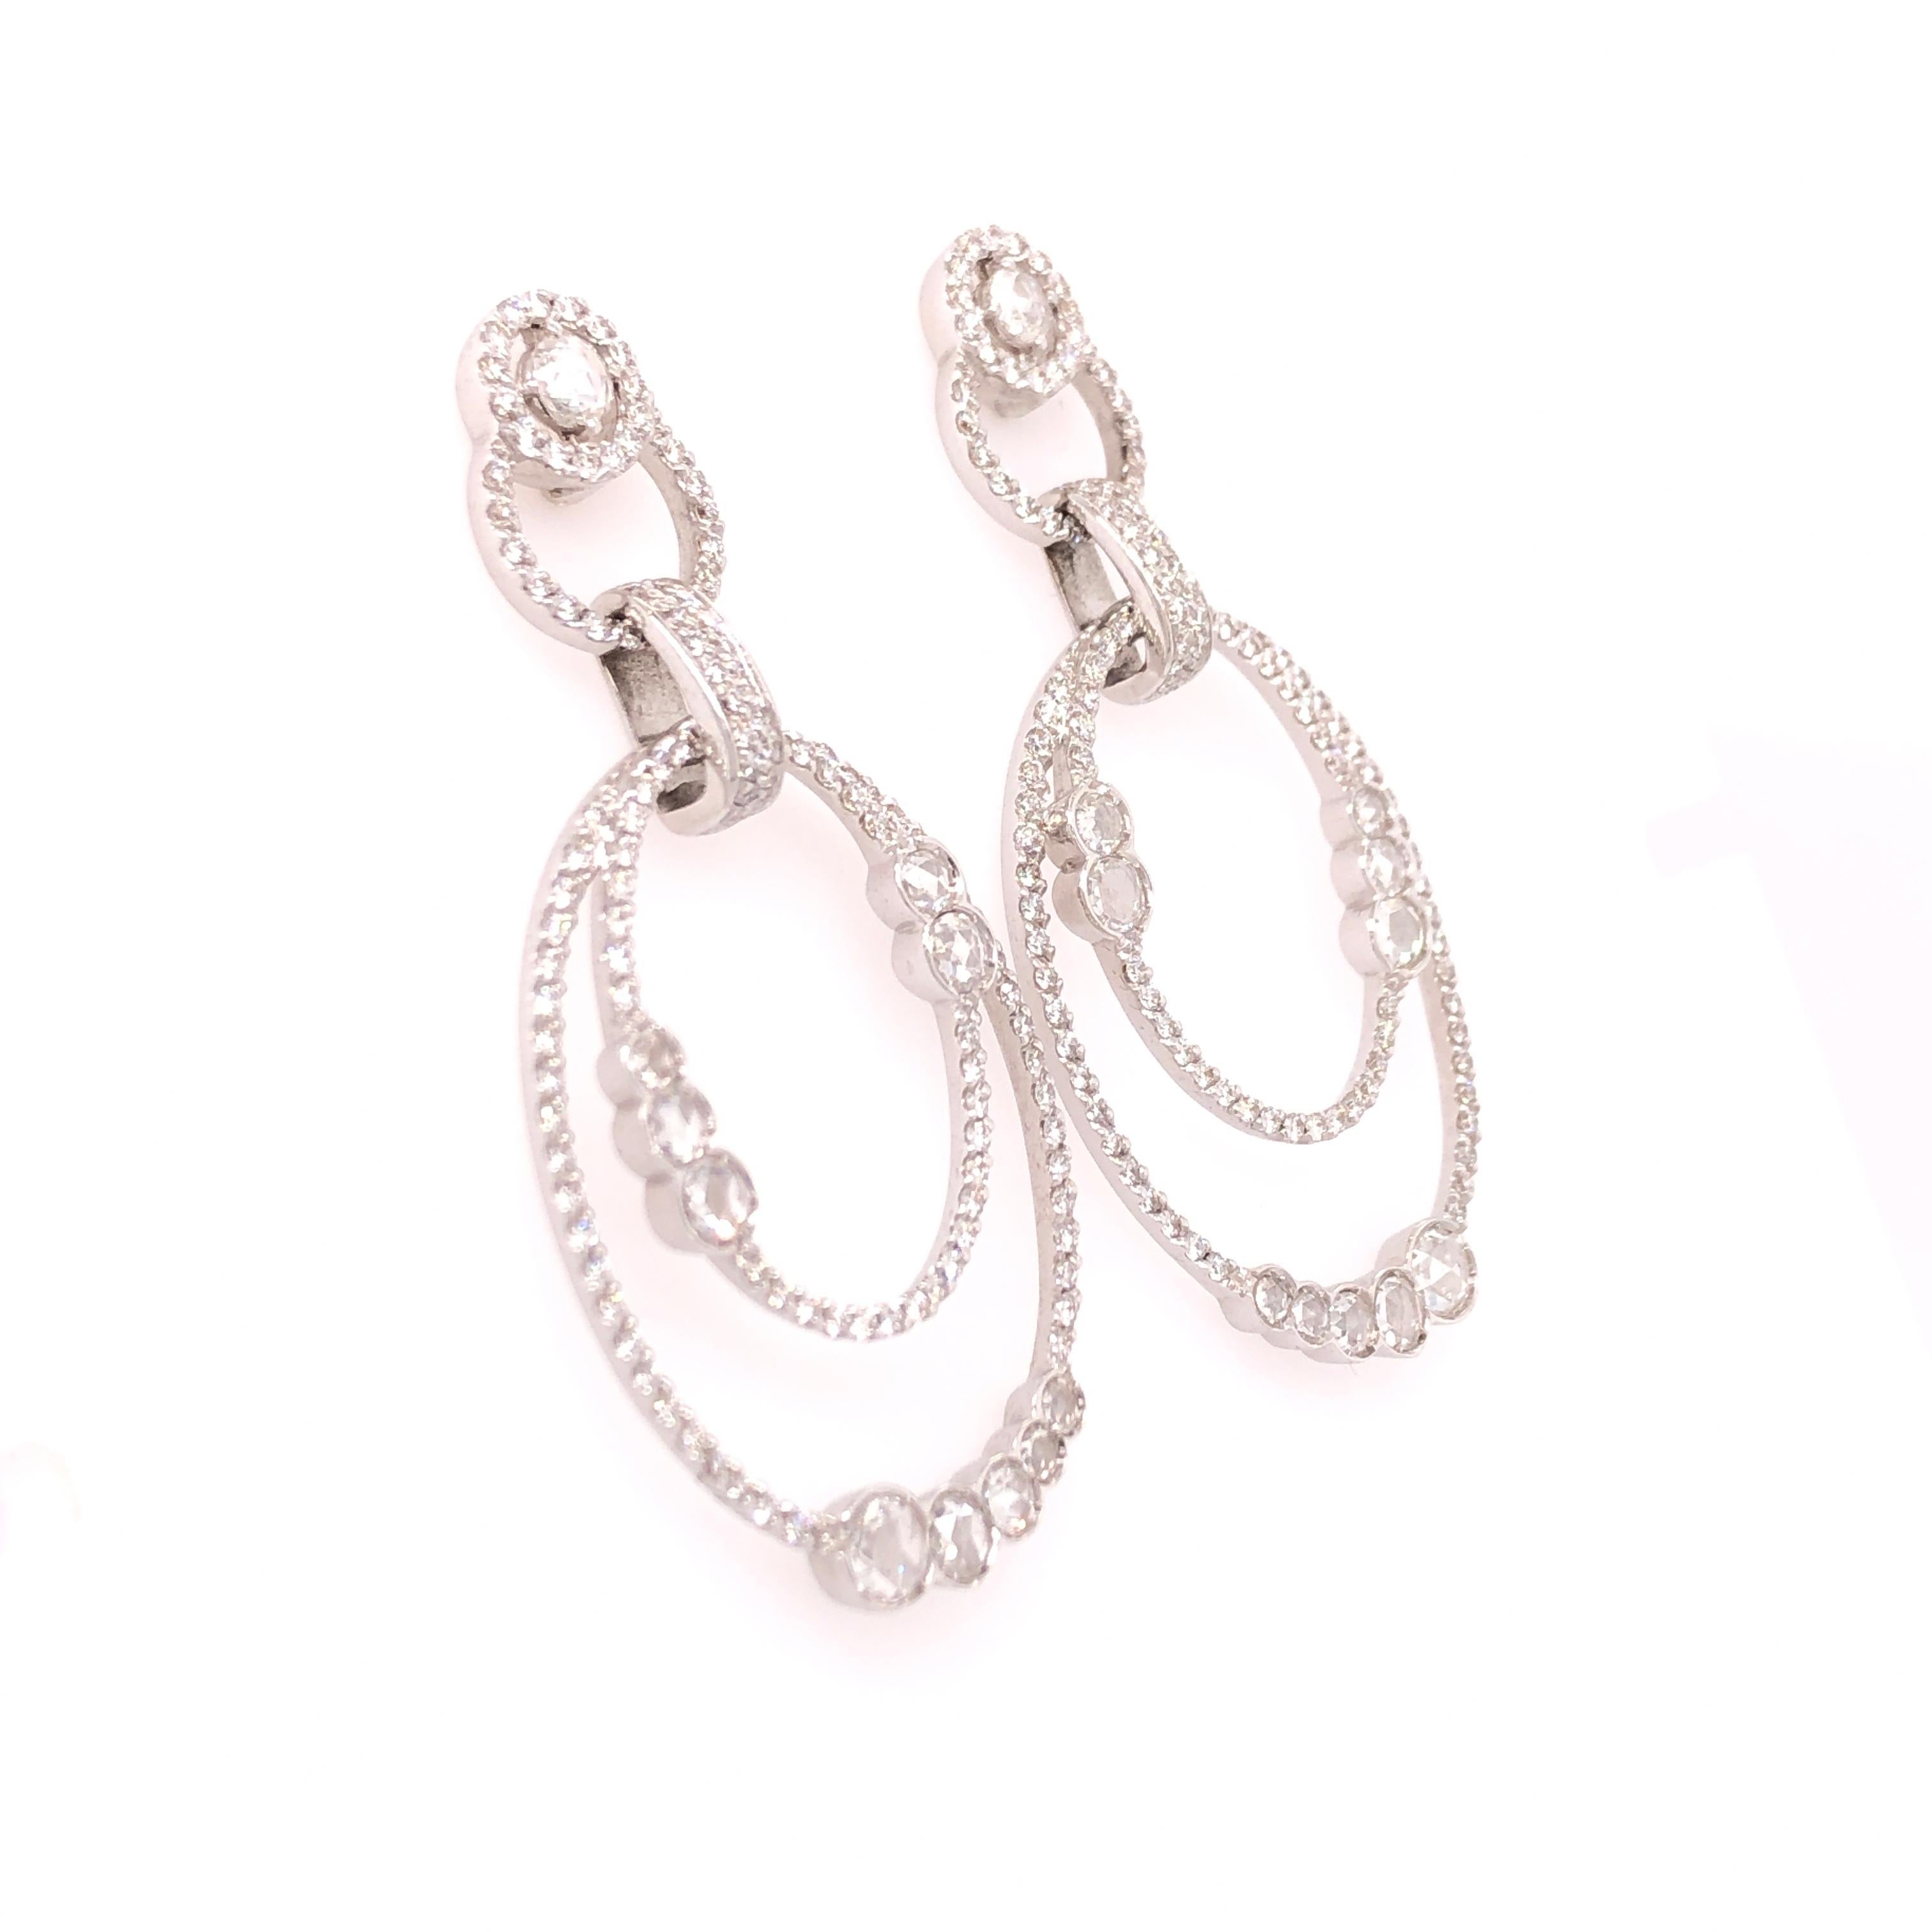 Straight from Italy, this pair of Verdi earrings is for the woman who wants to stand out without being garnish or ostentatious. The circular theme accentuates the asymmetrical symmetry of the pair. An approximate 3.29 CTW of diamonds bring the